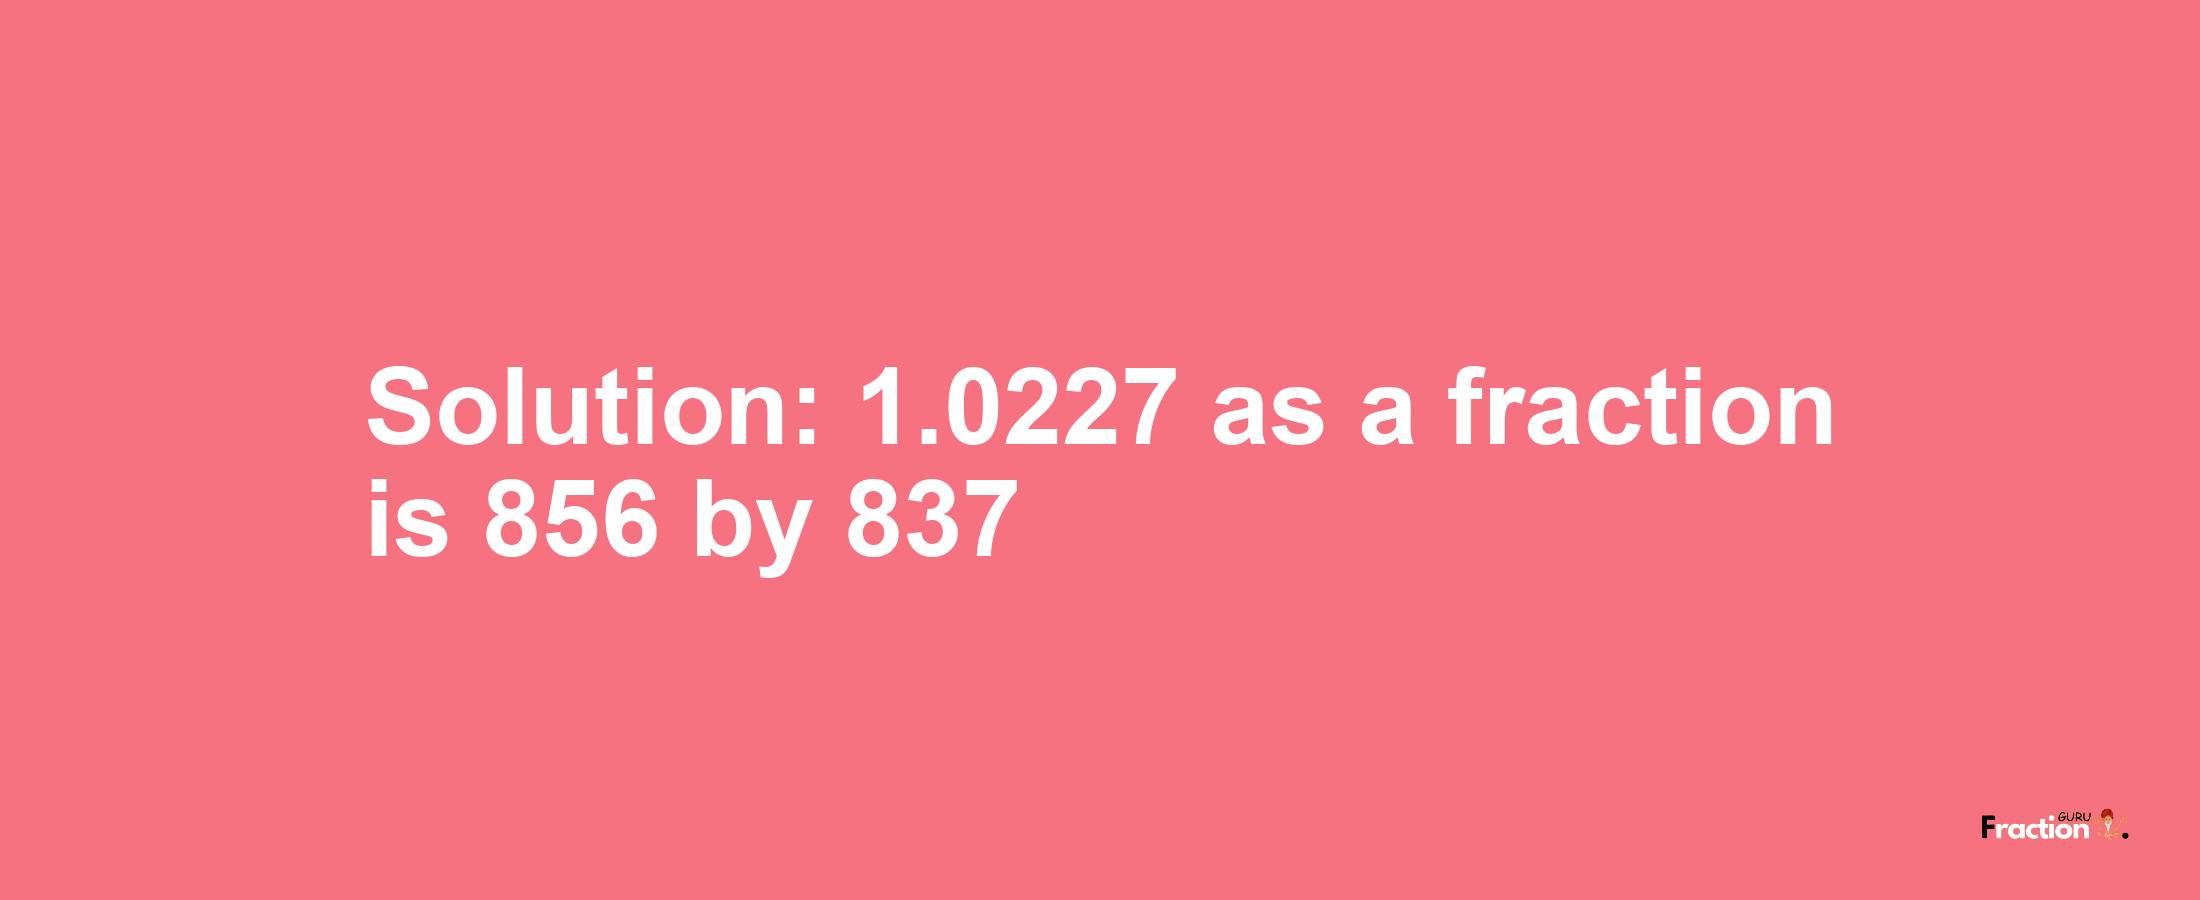 Solution:1.0227 as a fraction is 856/837